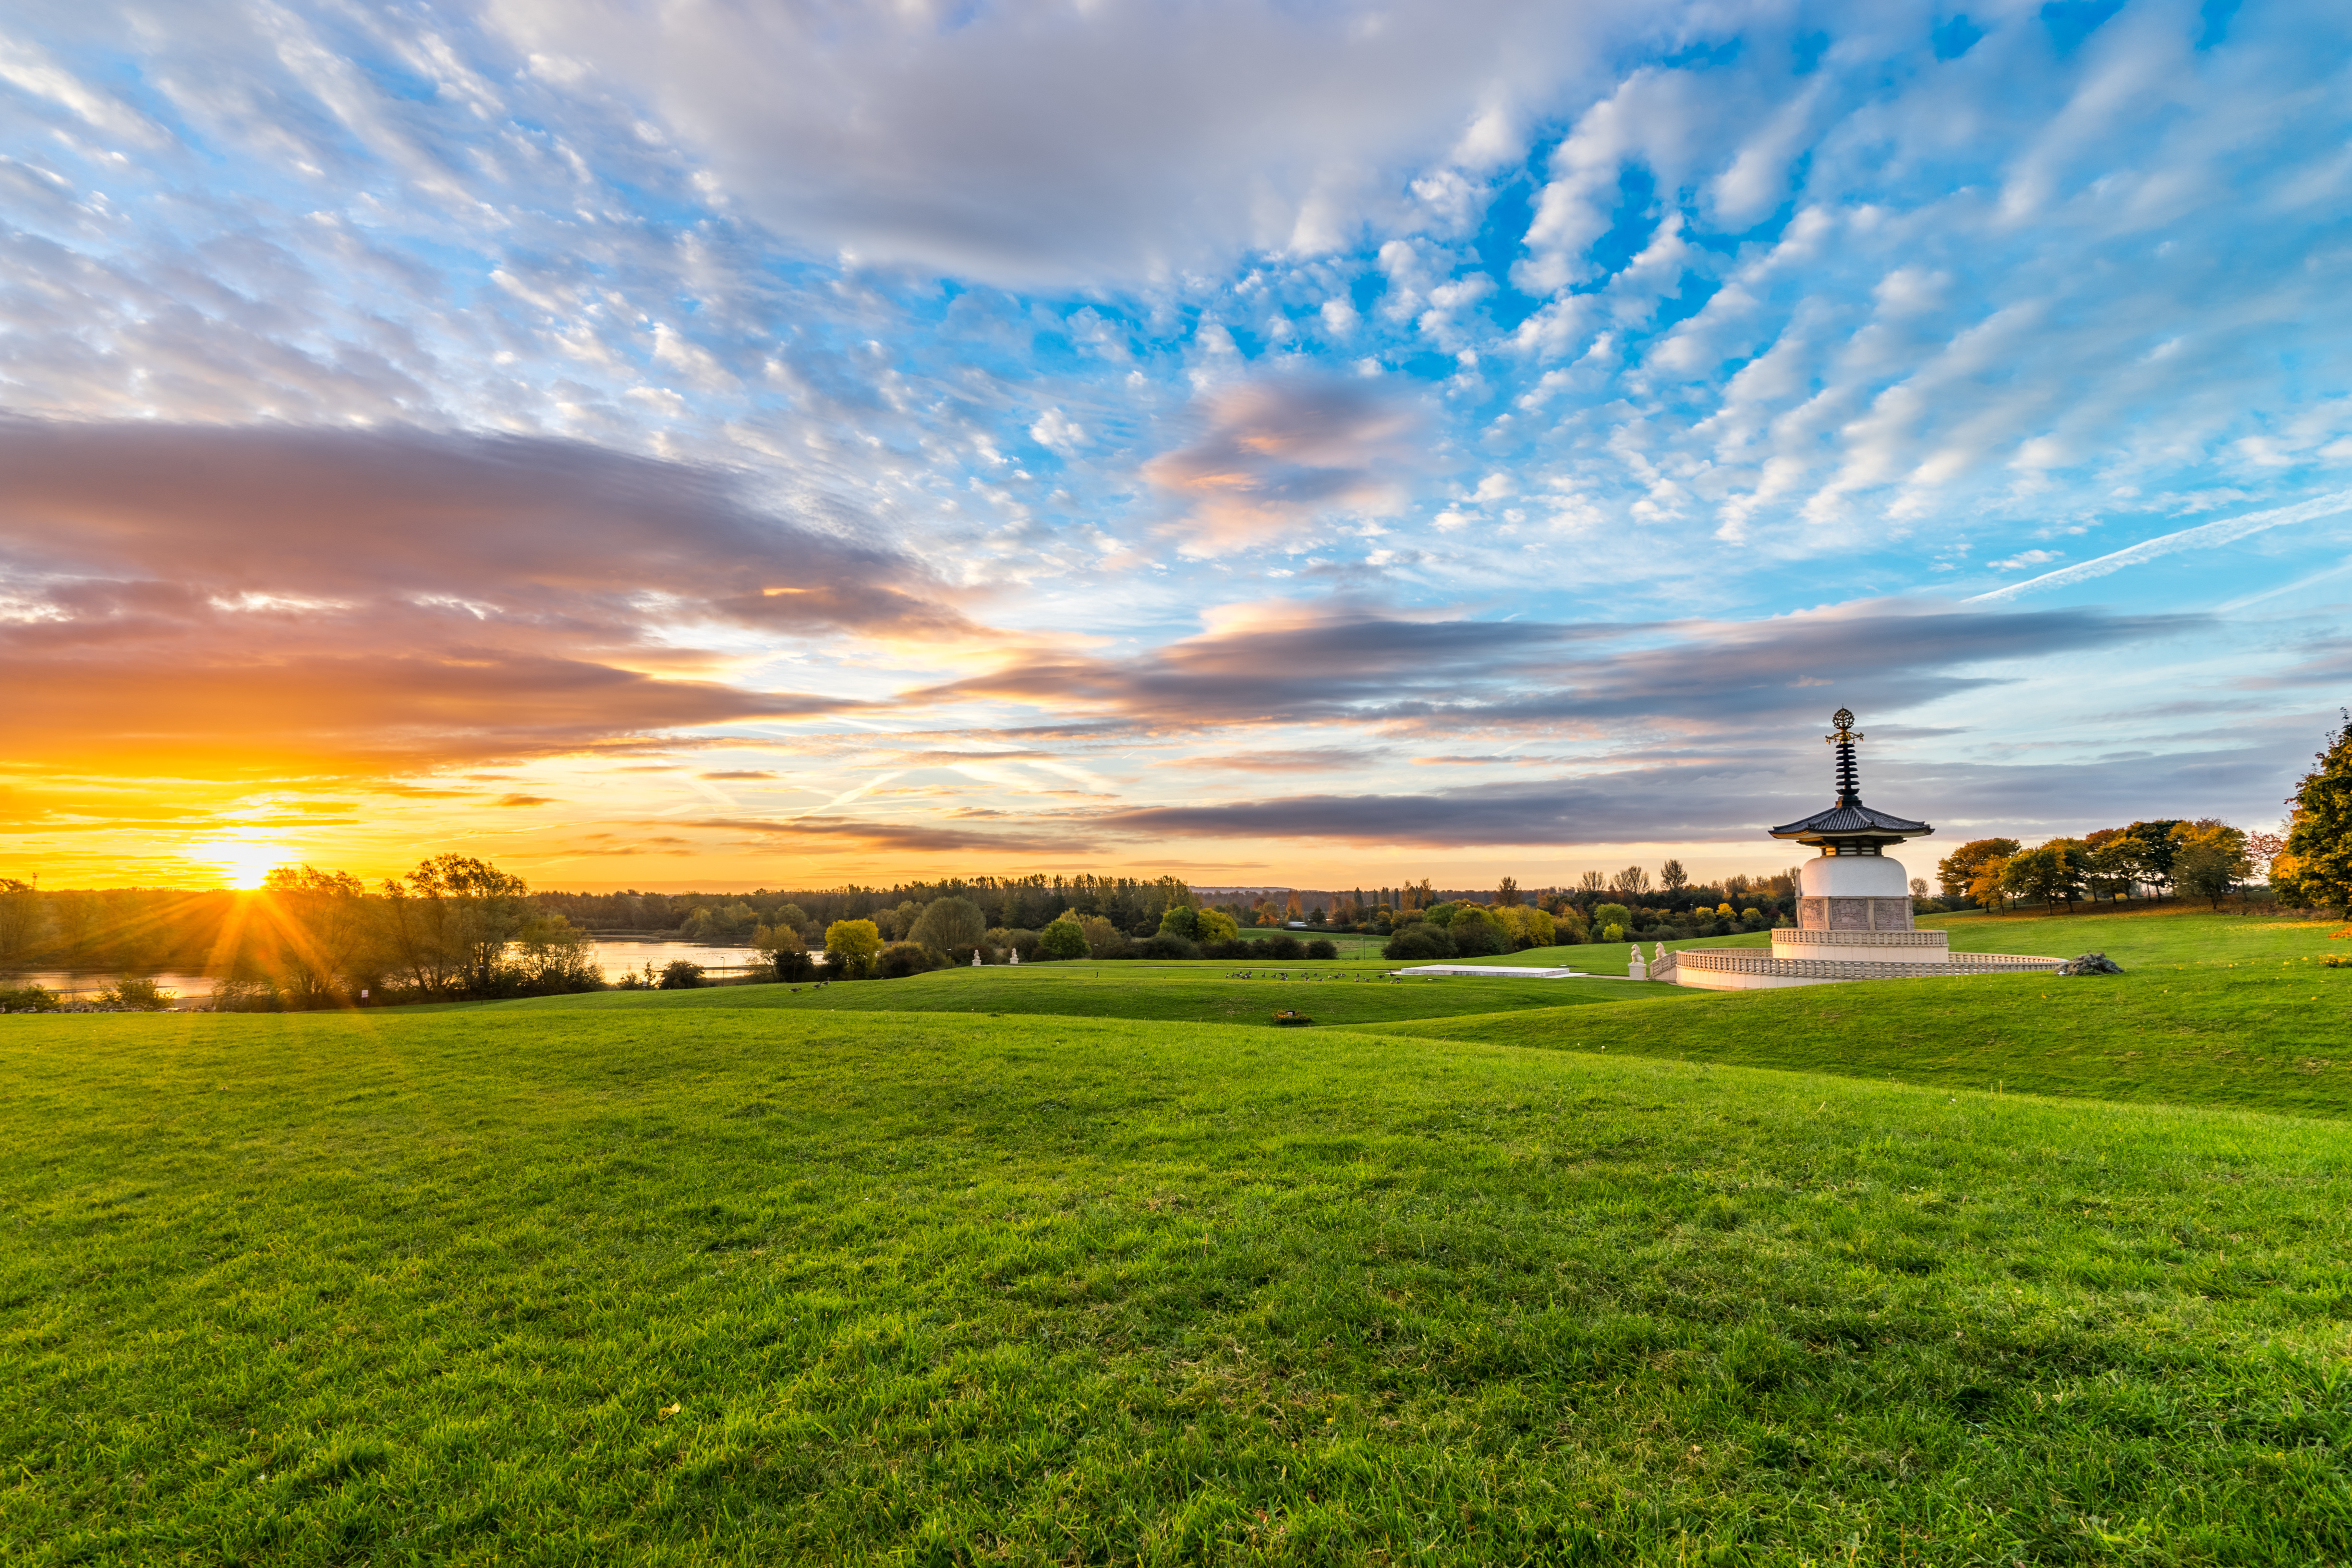 Panorama of Peace Pagoda temple at sunrise in Willen Park, Milton Keynes